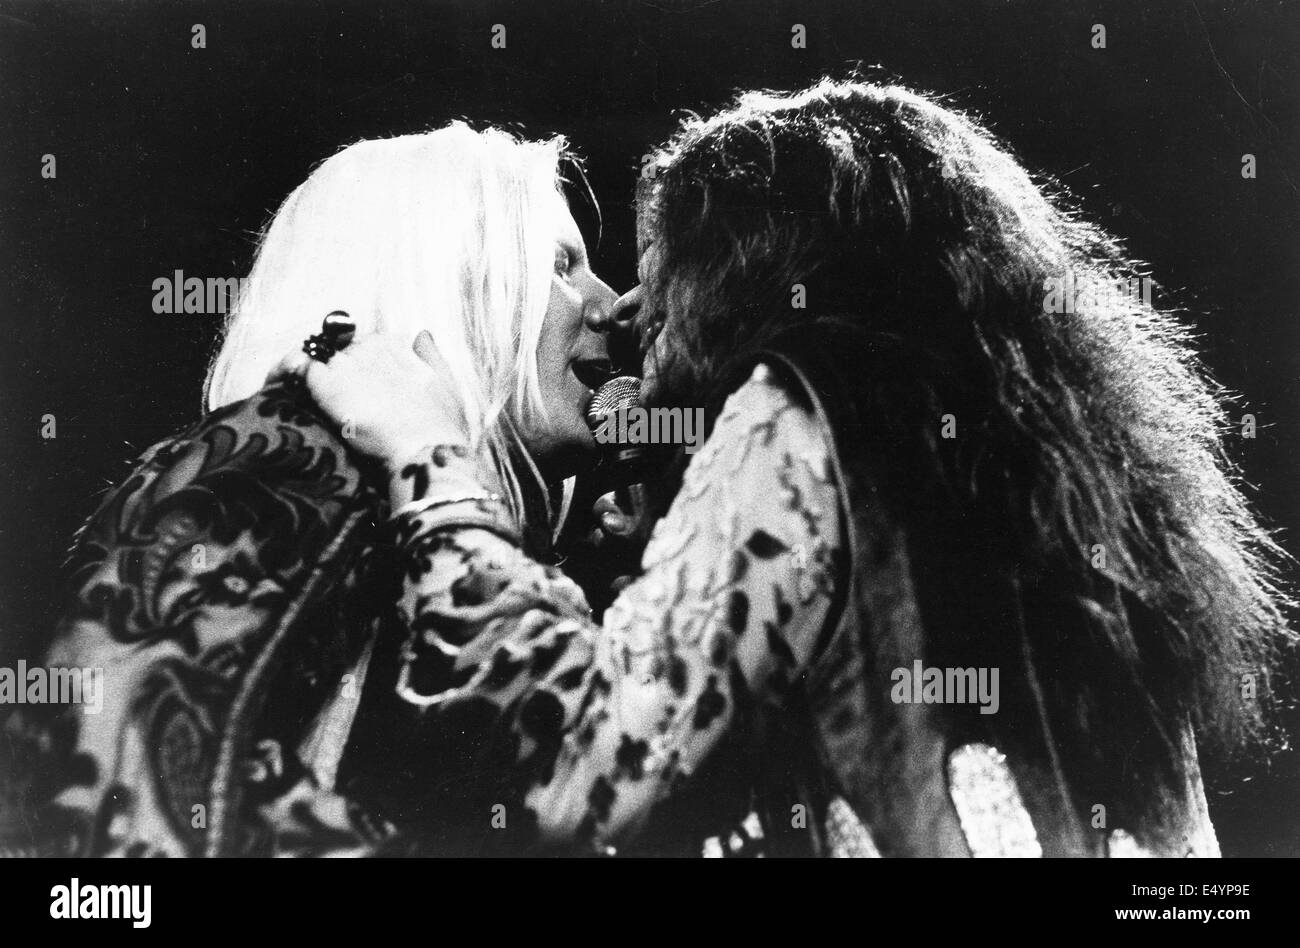 Johnny Winter, an American blues rock guitarist, known for his slide-guitar solos, was found dead in a hotel room outside Zurich. He was 70. PICTURED: Date unknown - JANIS JOPLIN with JOHNNY WINTER. Credit:  Globe Photos/ZUMAPRESS.com/Alamy Live News Stock Photo